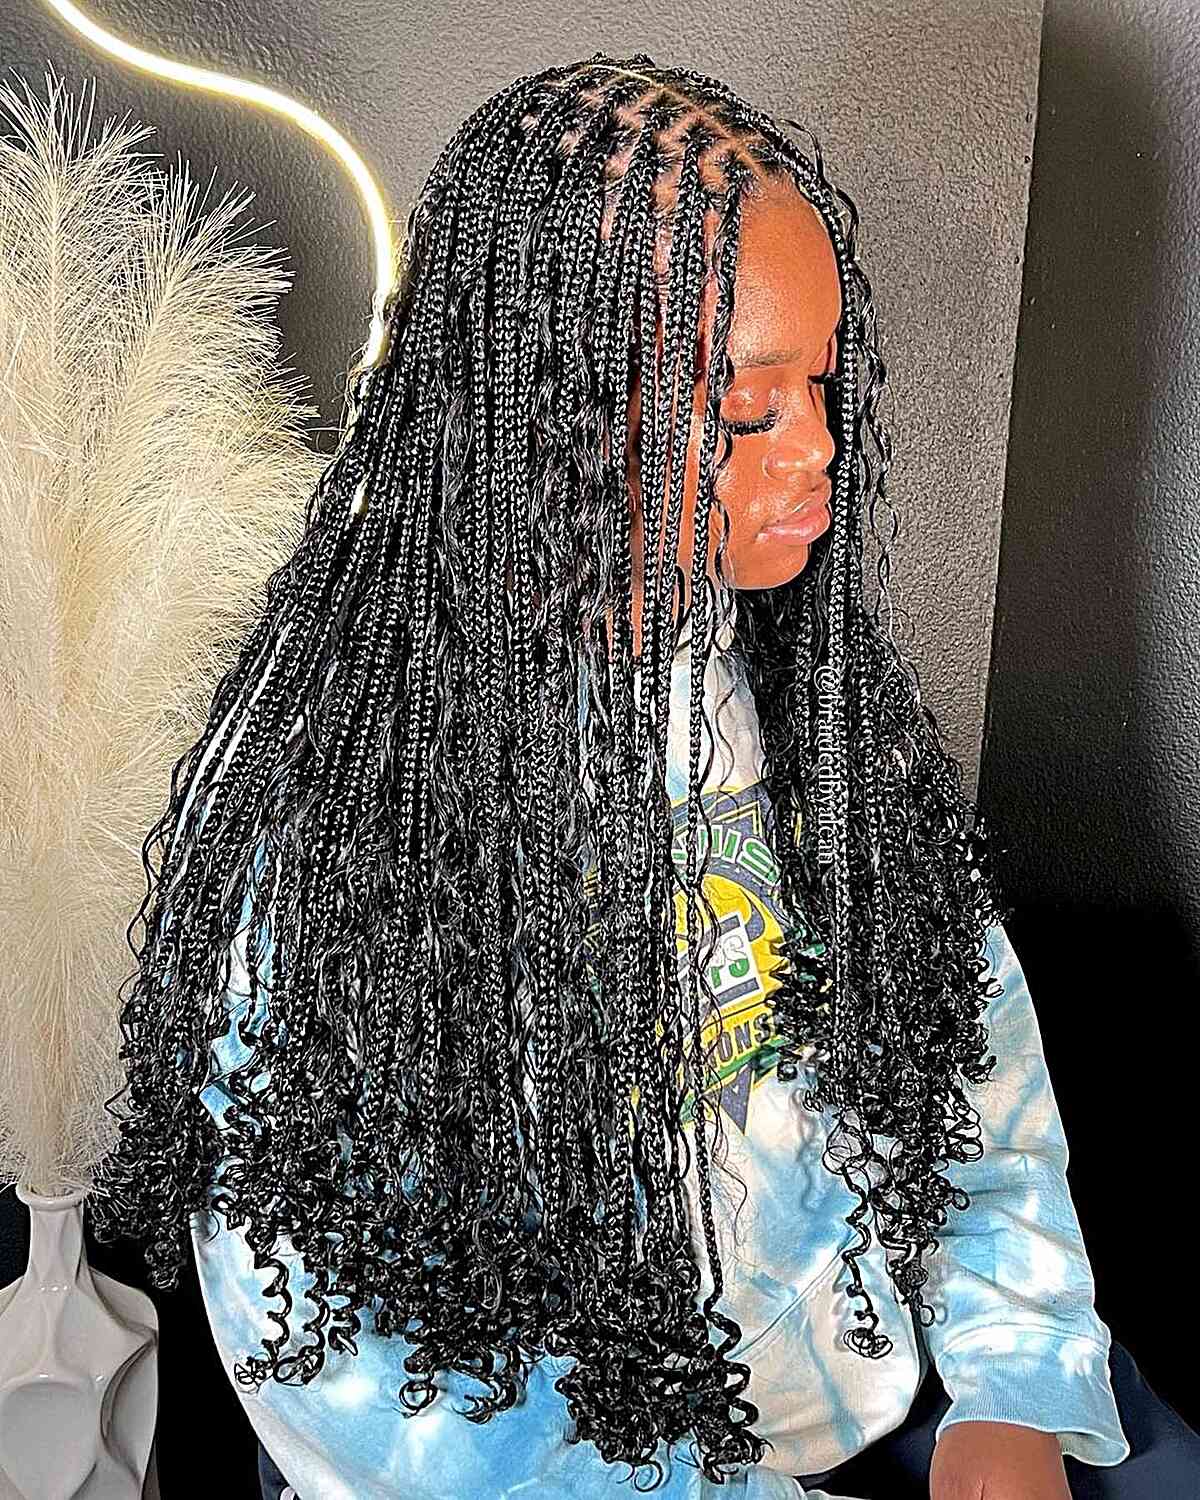 Waist-Length Protective Bohemian Hairstyle with Small Knotless Braids